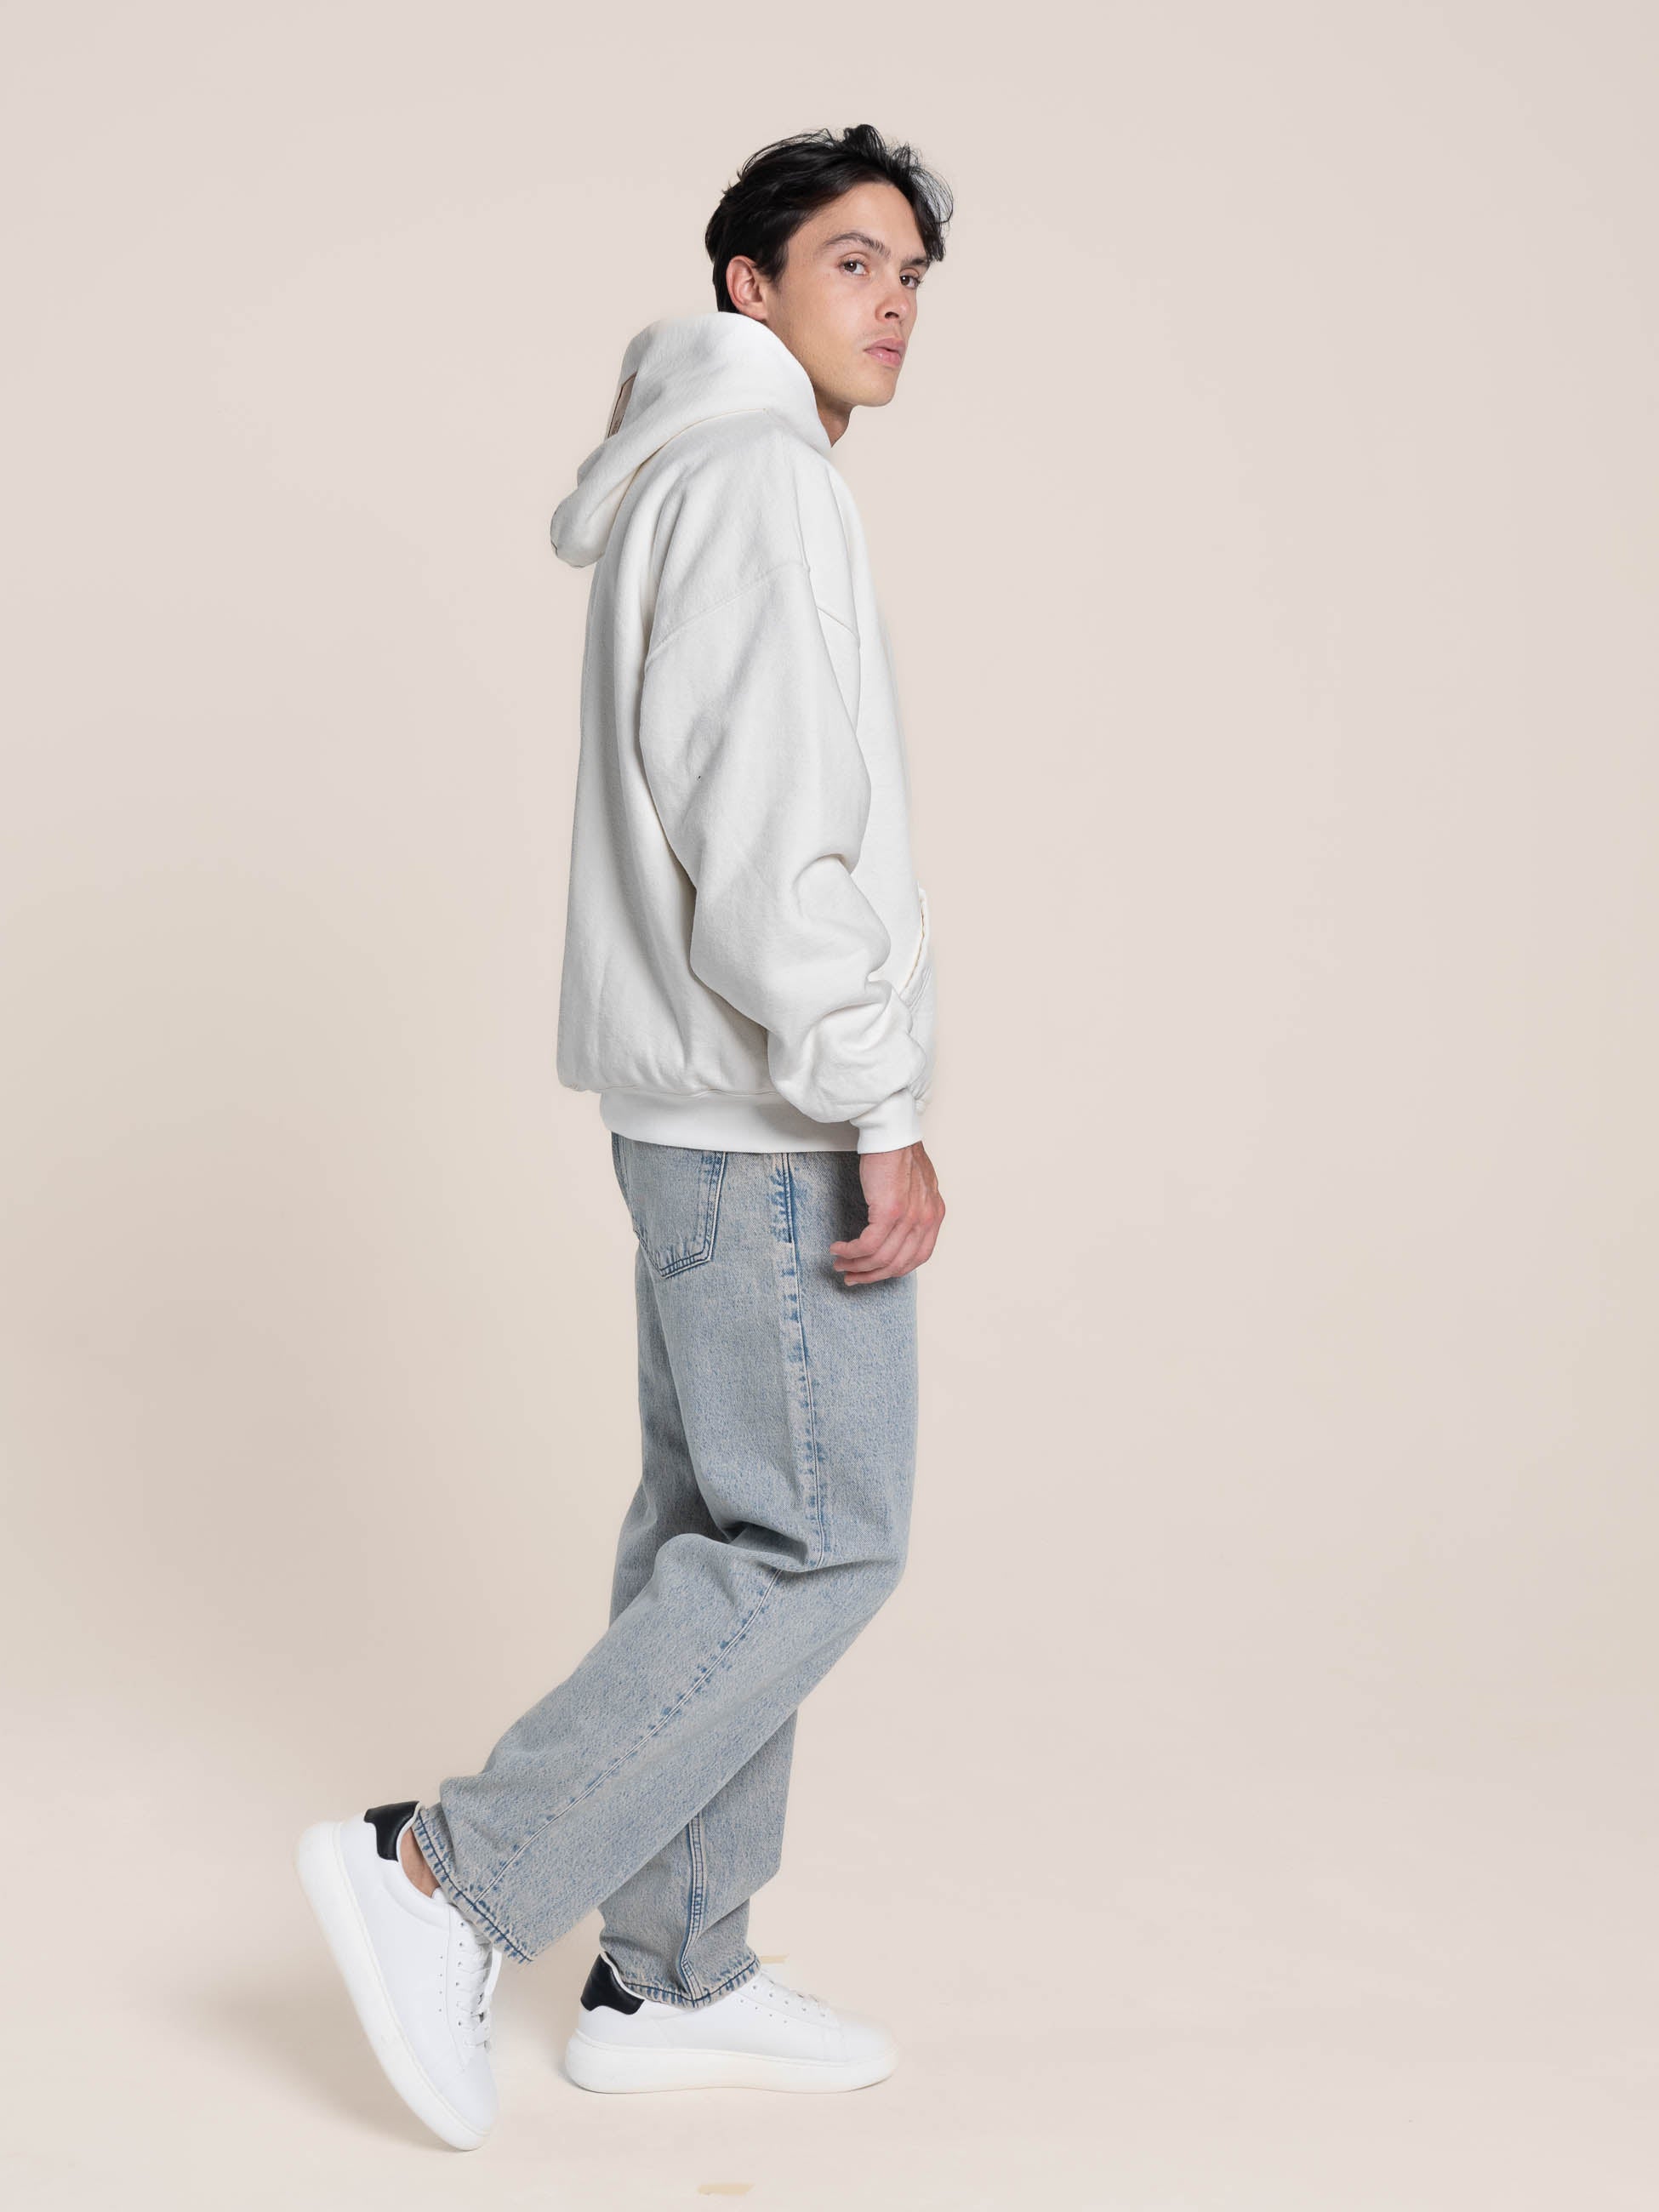 Male Model wears Publik Brand Double Layered Hoodie Acoustic White Heavyweight Fleece, all made in USA, side view